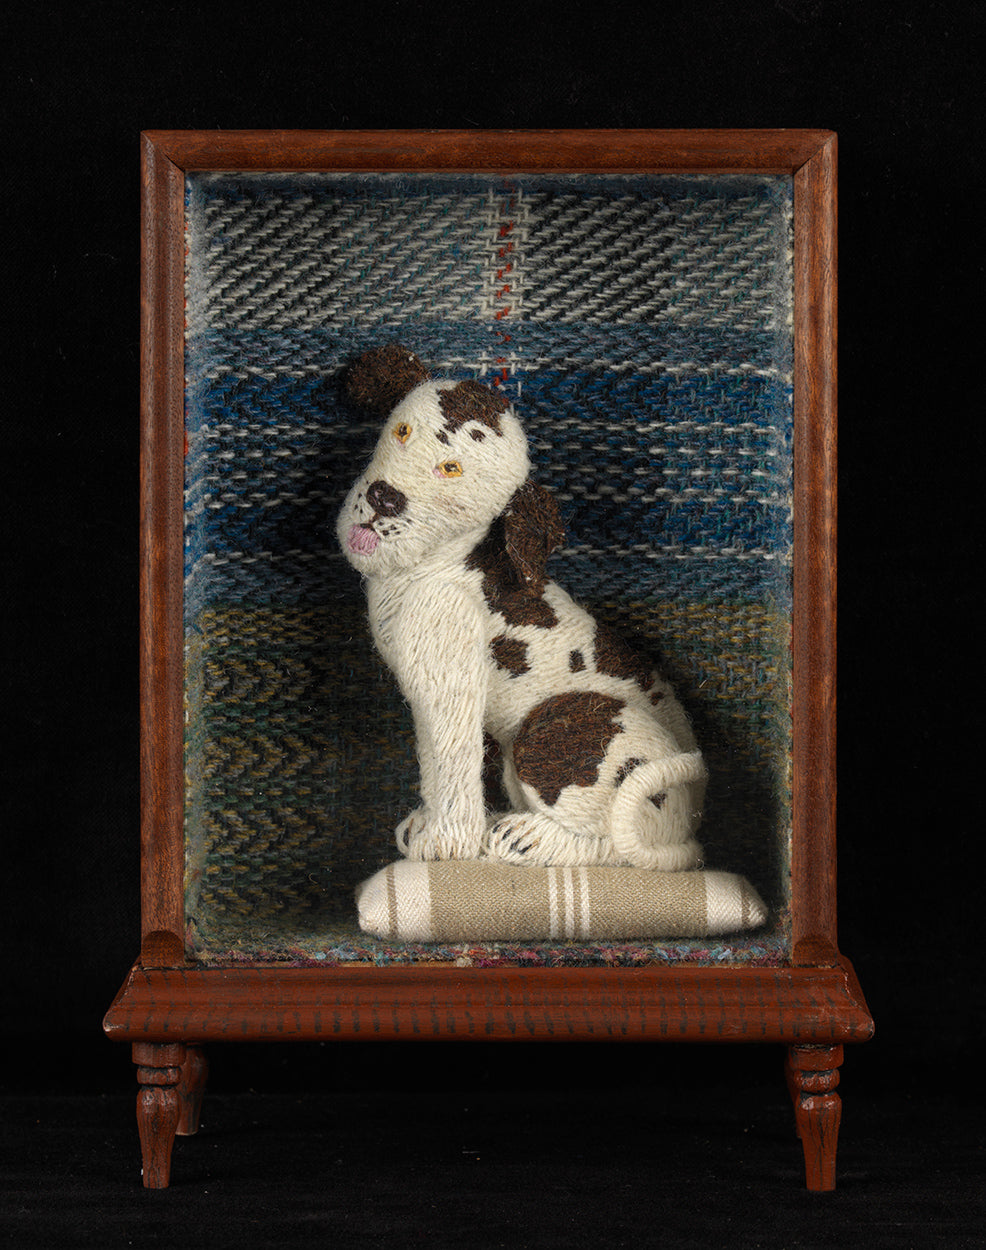 “Spotty on his Cushion”